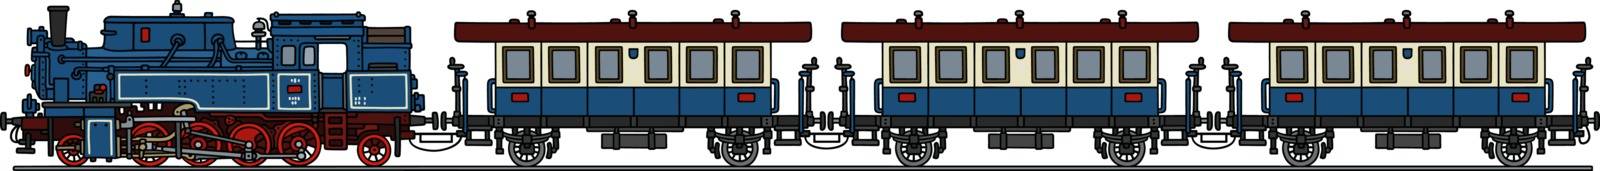 The vectorized hand drawing of a classic blue passenger 
steam train